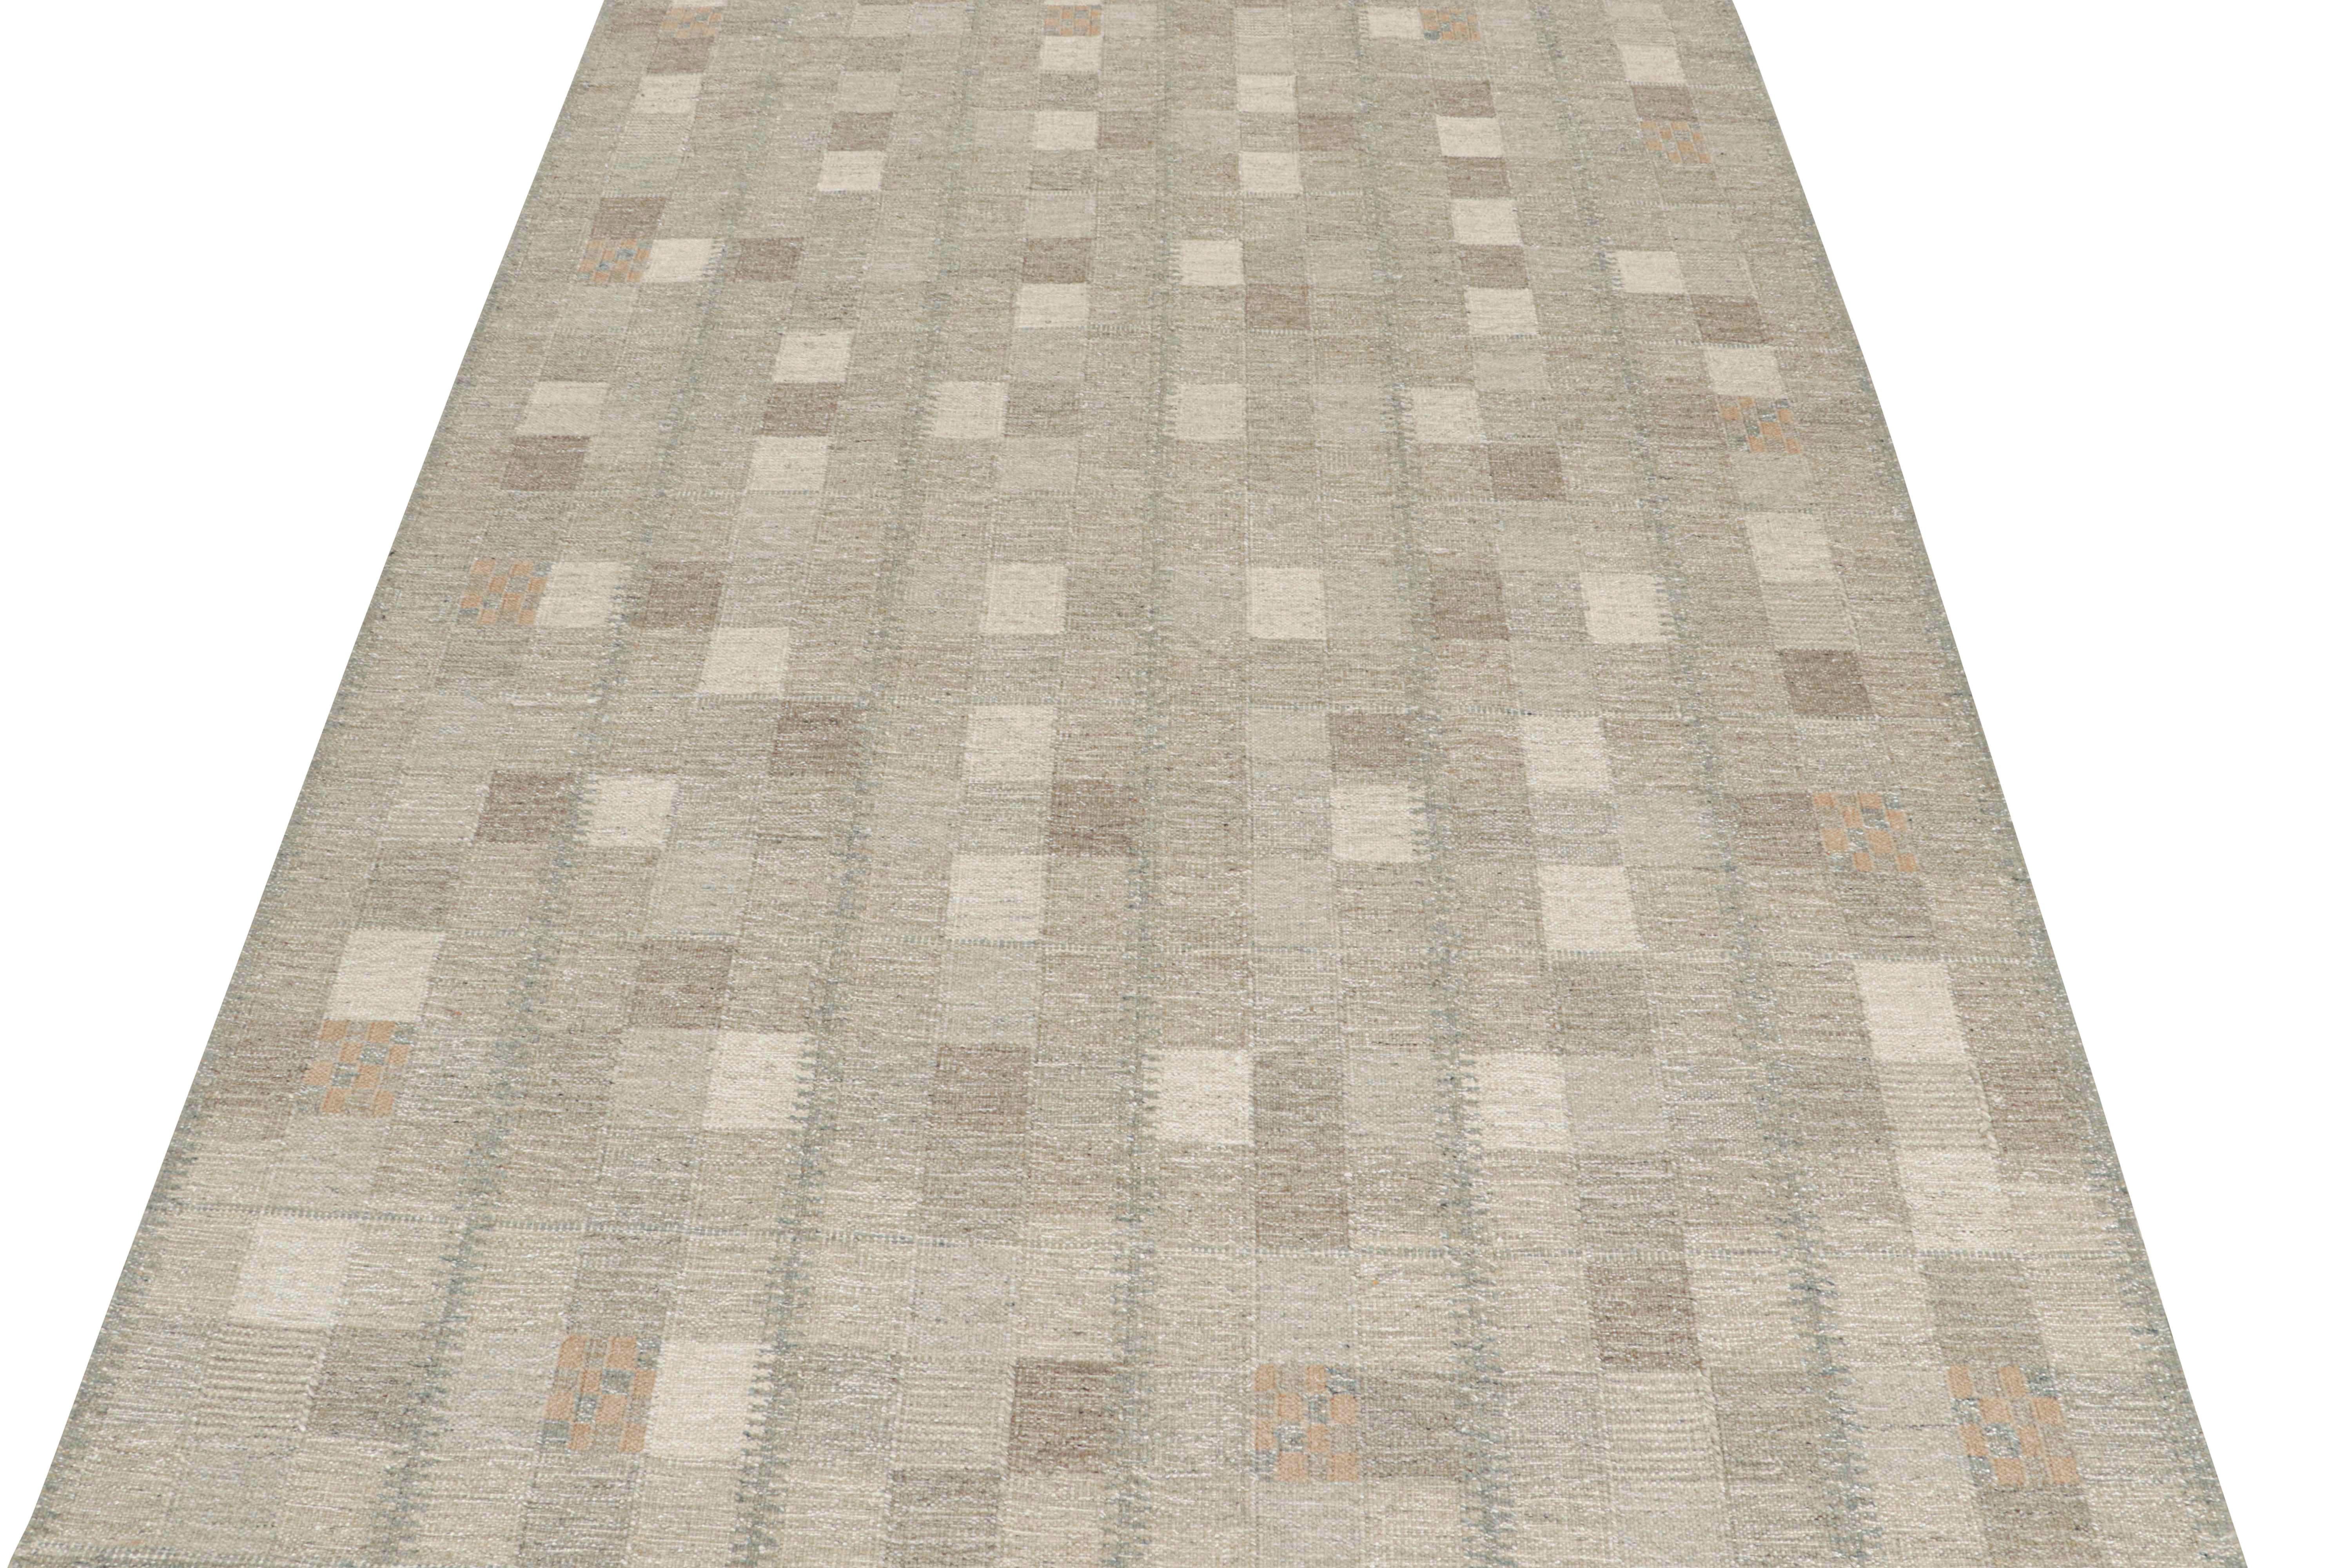 This 10x14 Kilim is a bold new addition to the Scandinavian Collection by Rug & Kilim. Handwoven in wool and natural yarns, its design reflects a contemporary take on mid-century Rollakans and Swedish Deco style.

On the Design:

This new flat